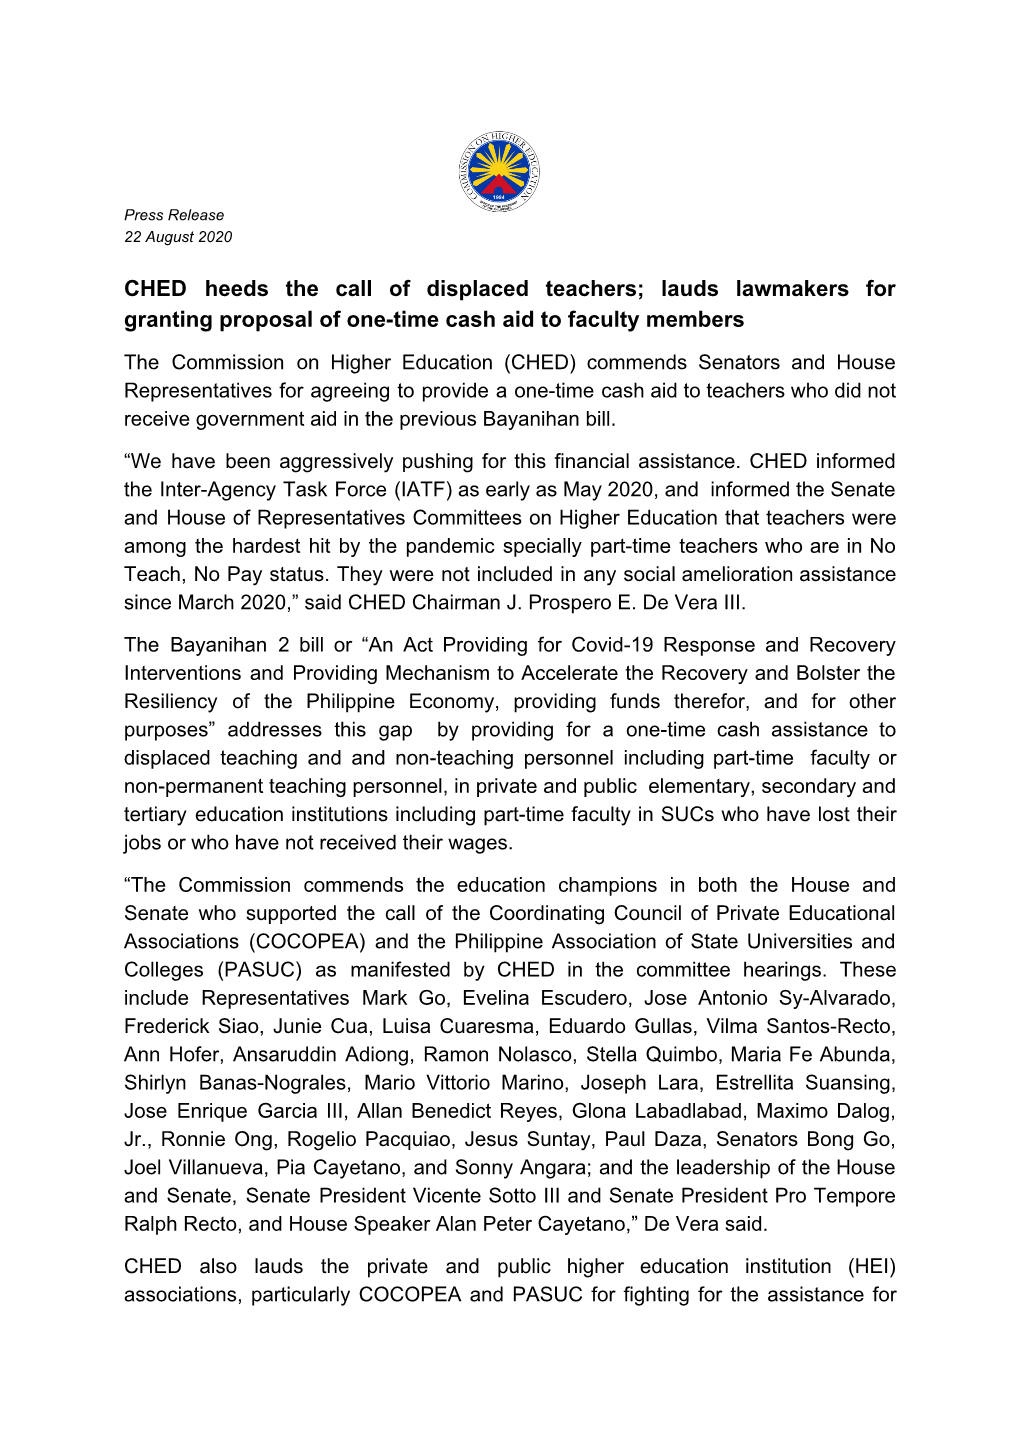 CHED Heeds the Call of Displaced Teachers; Lauds Lawmakers for Granting Proposal of One-Time Cash Aid to Faculty Members